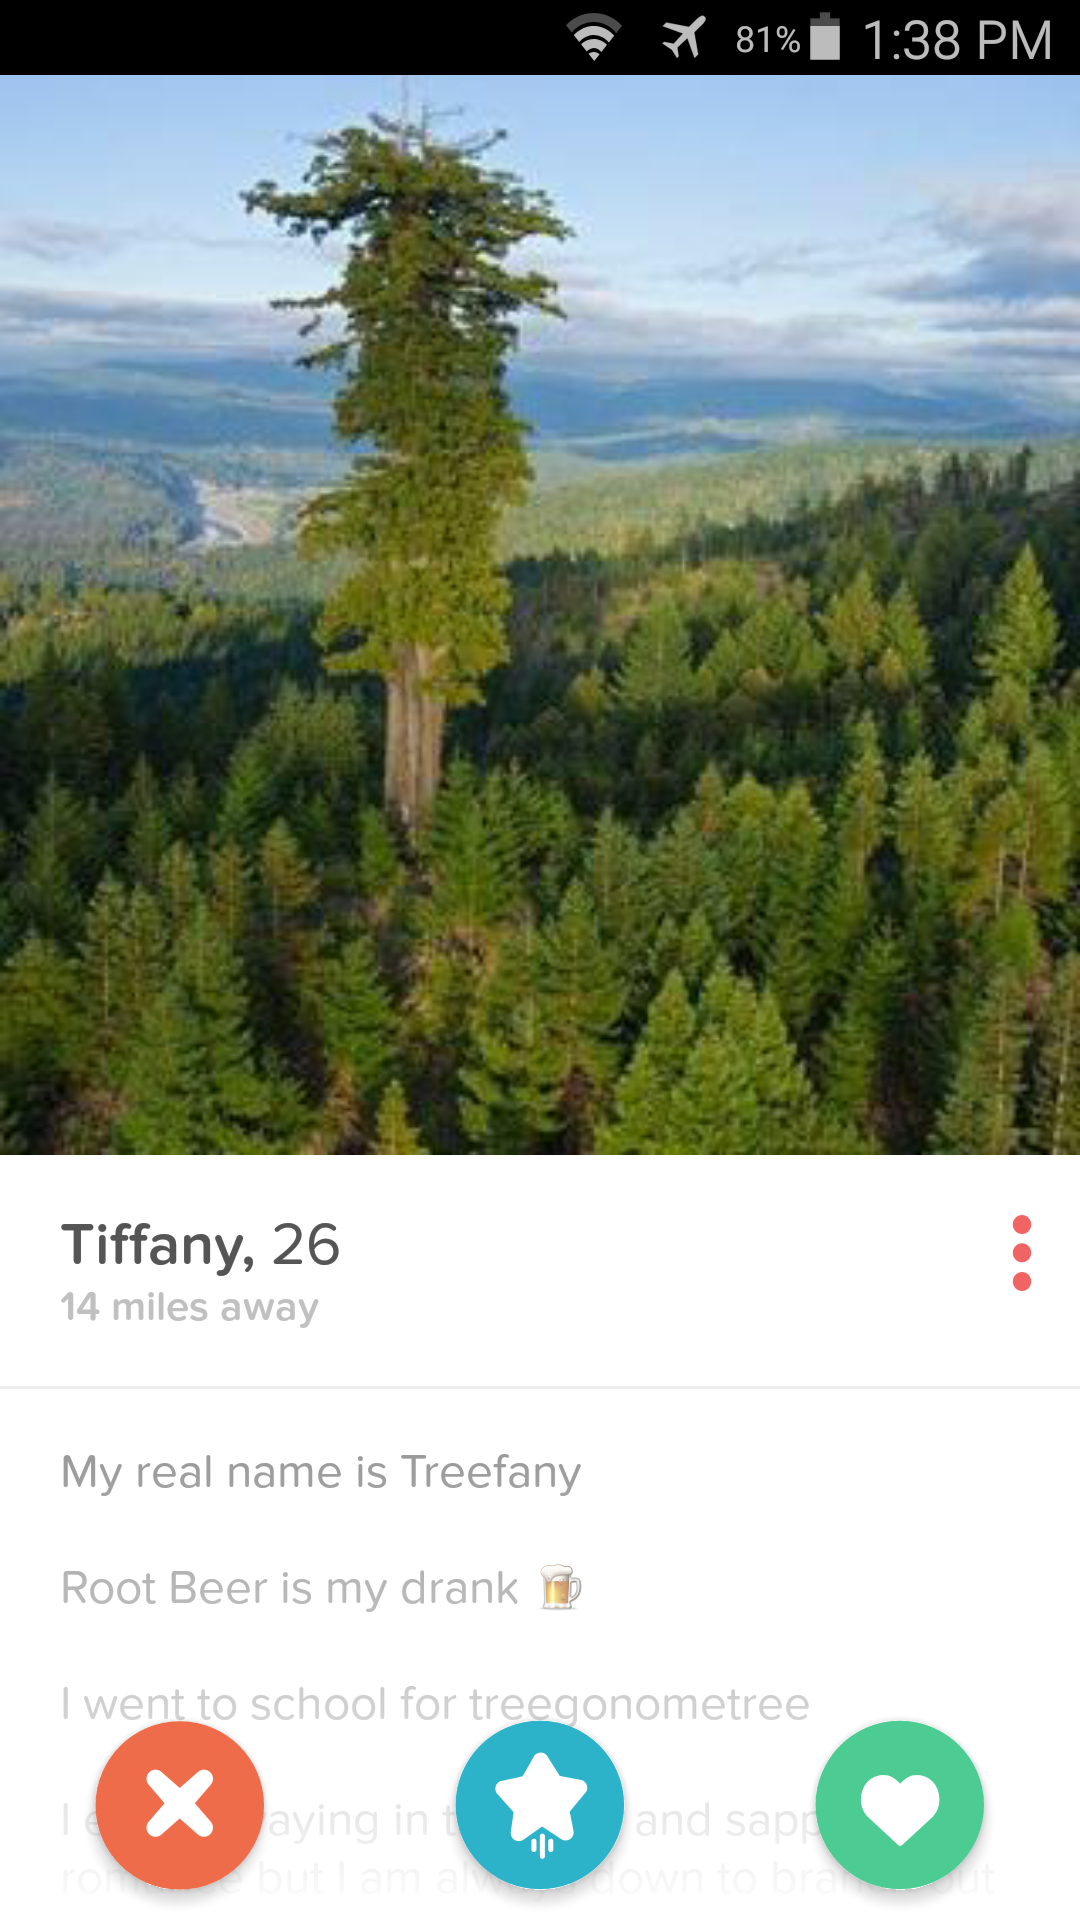 7 81% Tiffany, 26 14 miles away My real name is Treefany Root Beer is my drank 1 I went school for a gonometree